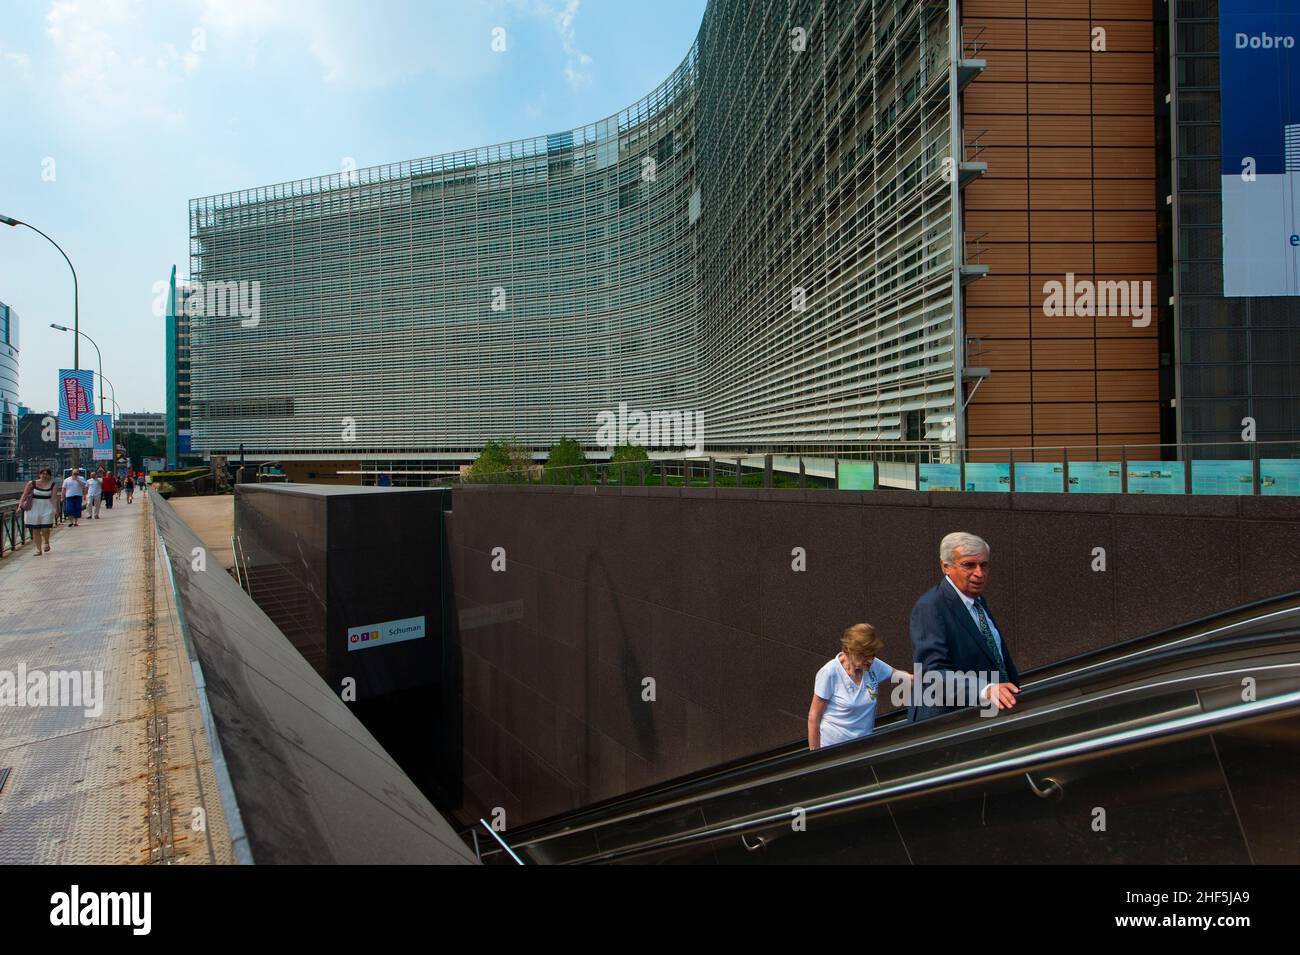 Brussels, Belgium. The Berlaymont Building (a.k.a. BERL) at Wetstraat, from which the European Commission governs over most of the European Union. Stock Photo